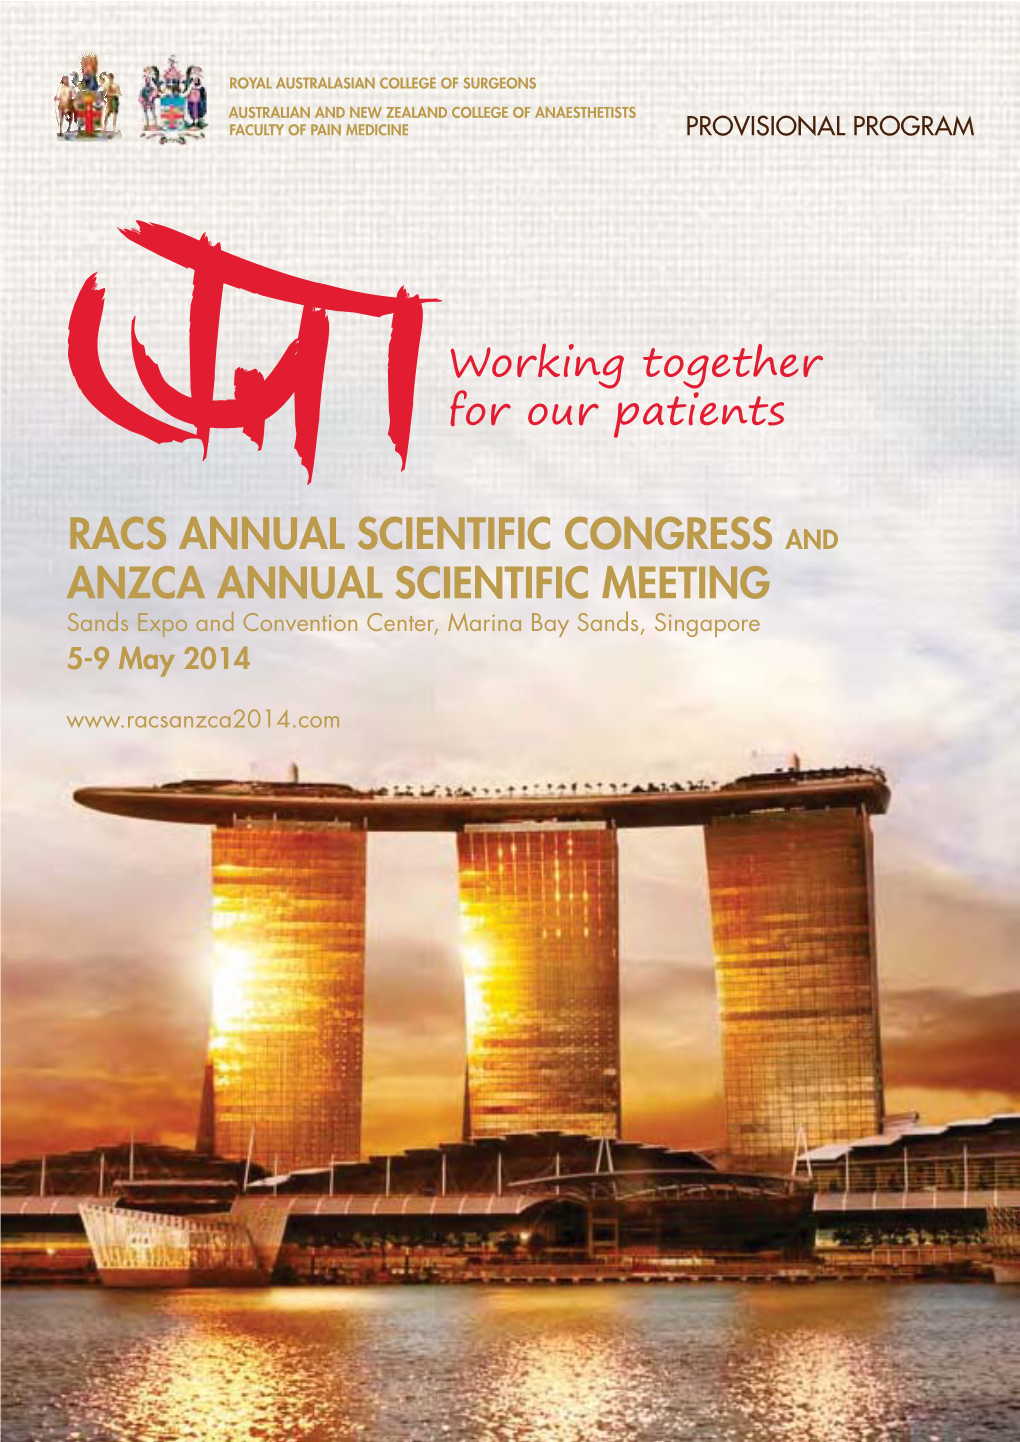 RACS ASC and ANZCA ASM – 5-9 May 2014 Sands Expo and Convention Center, Marina Bay Sands, Singapore